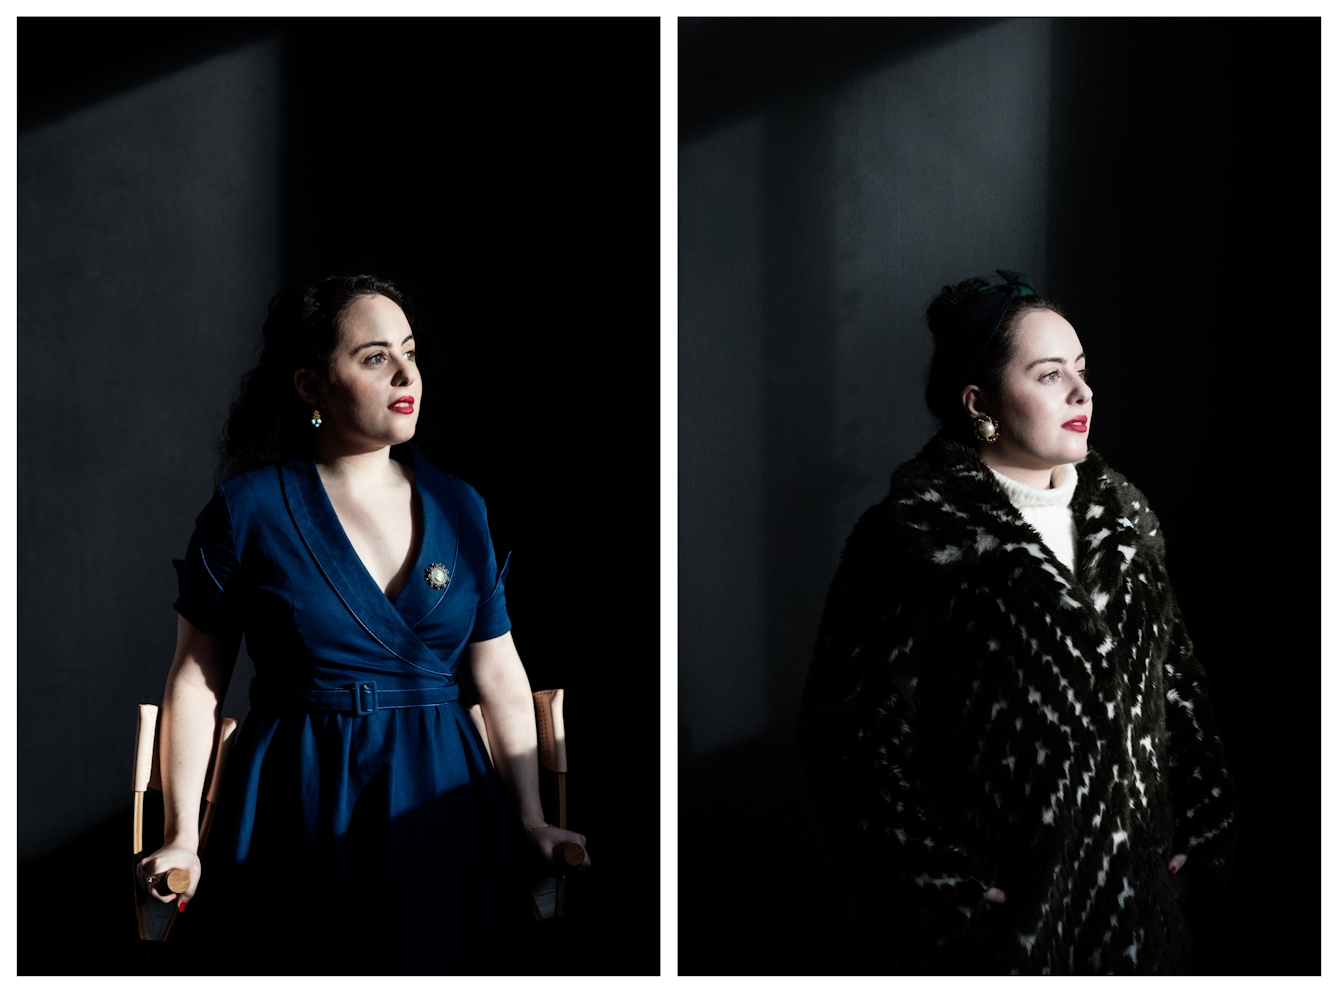 Photographic diptych. The image on the left shows a young woman in a blue dress with brooch standing looking towards the light of a window, right of camera. She is standing holding a crutch in each hand. The image on the right shows a young woman in a faux fur coat standing looking towards the light of a window, right of camera. In both images she is standing against a black background where the shape of the window is projected by the incoming sunlight.